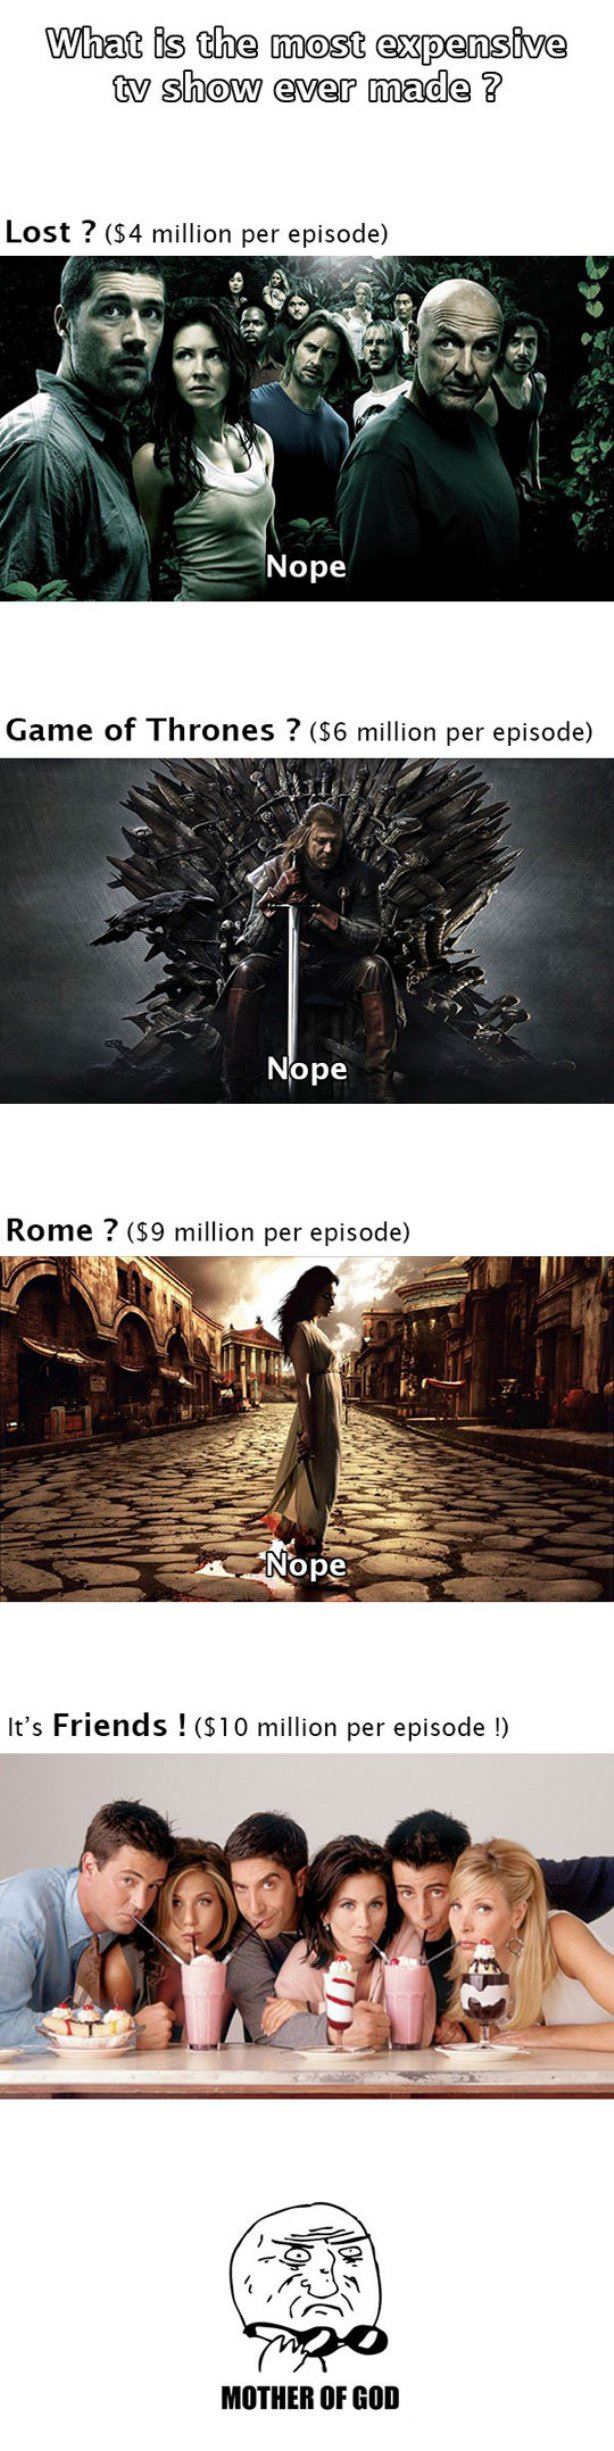 Most Expensive Tv Show